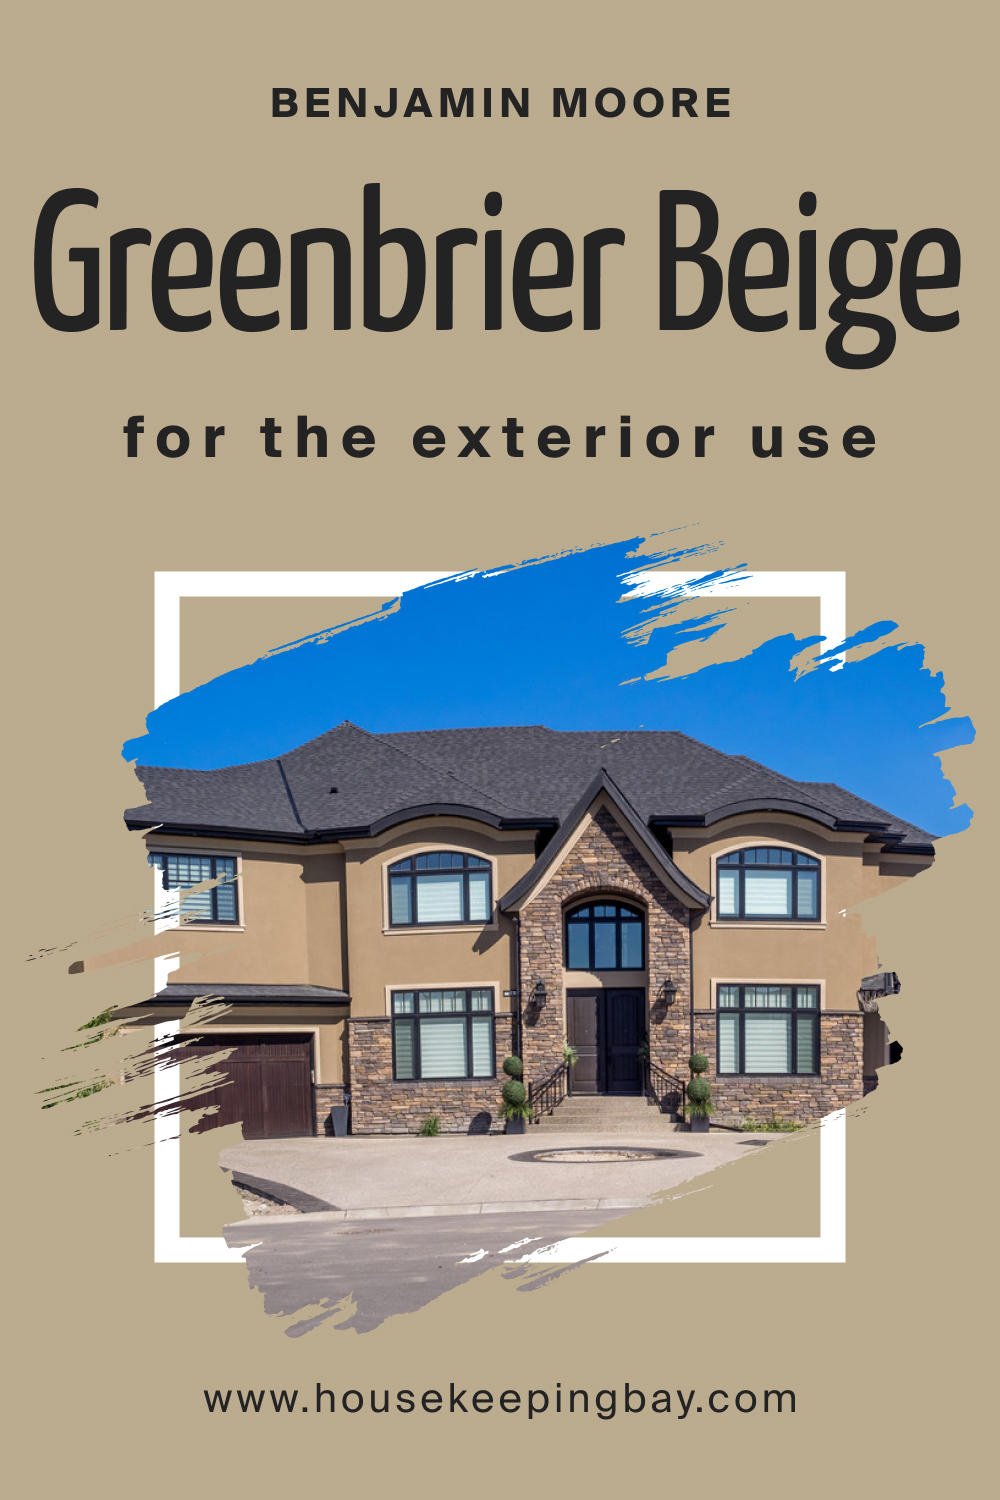 How to Use BM Greenbrier Beige HC-79 for an Exterior?